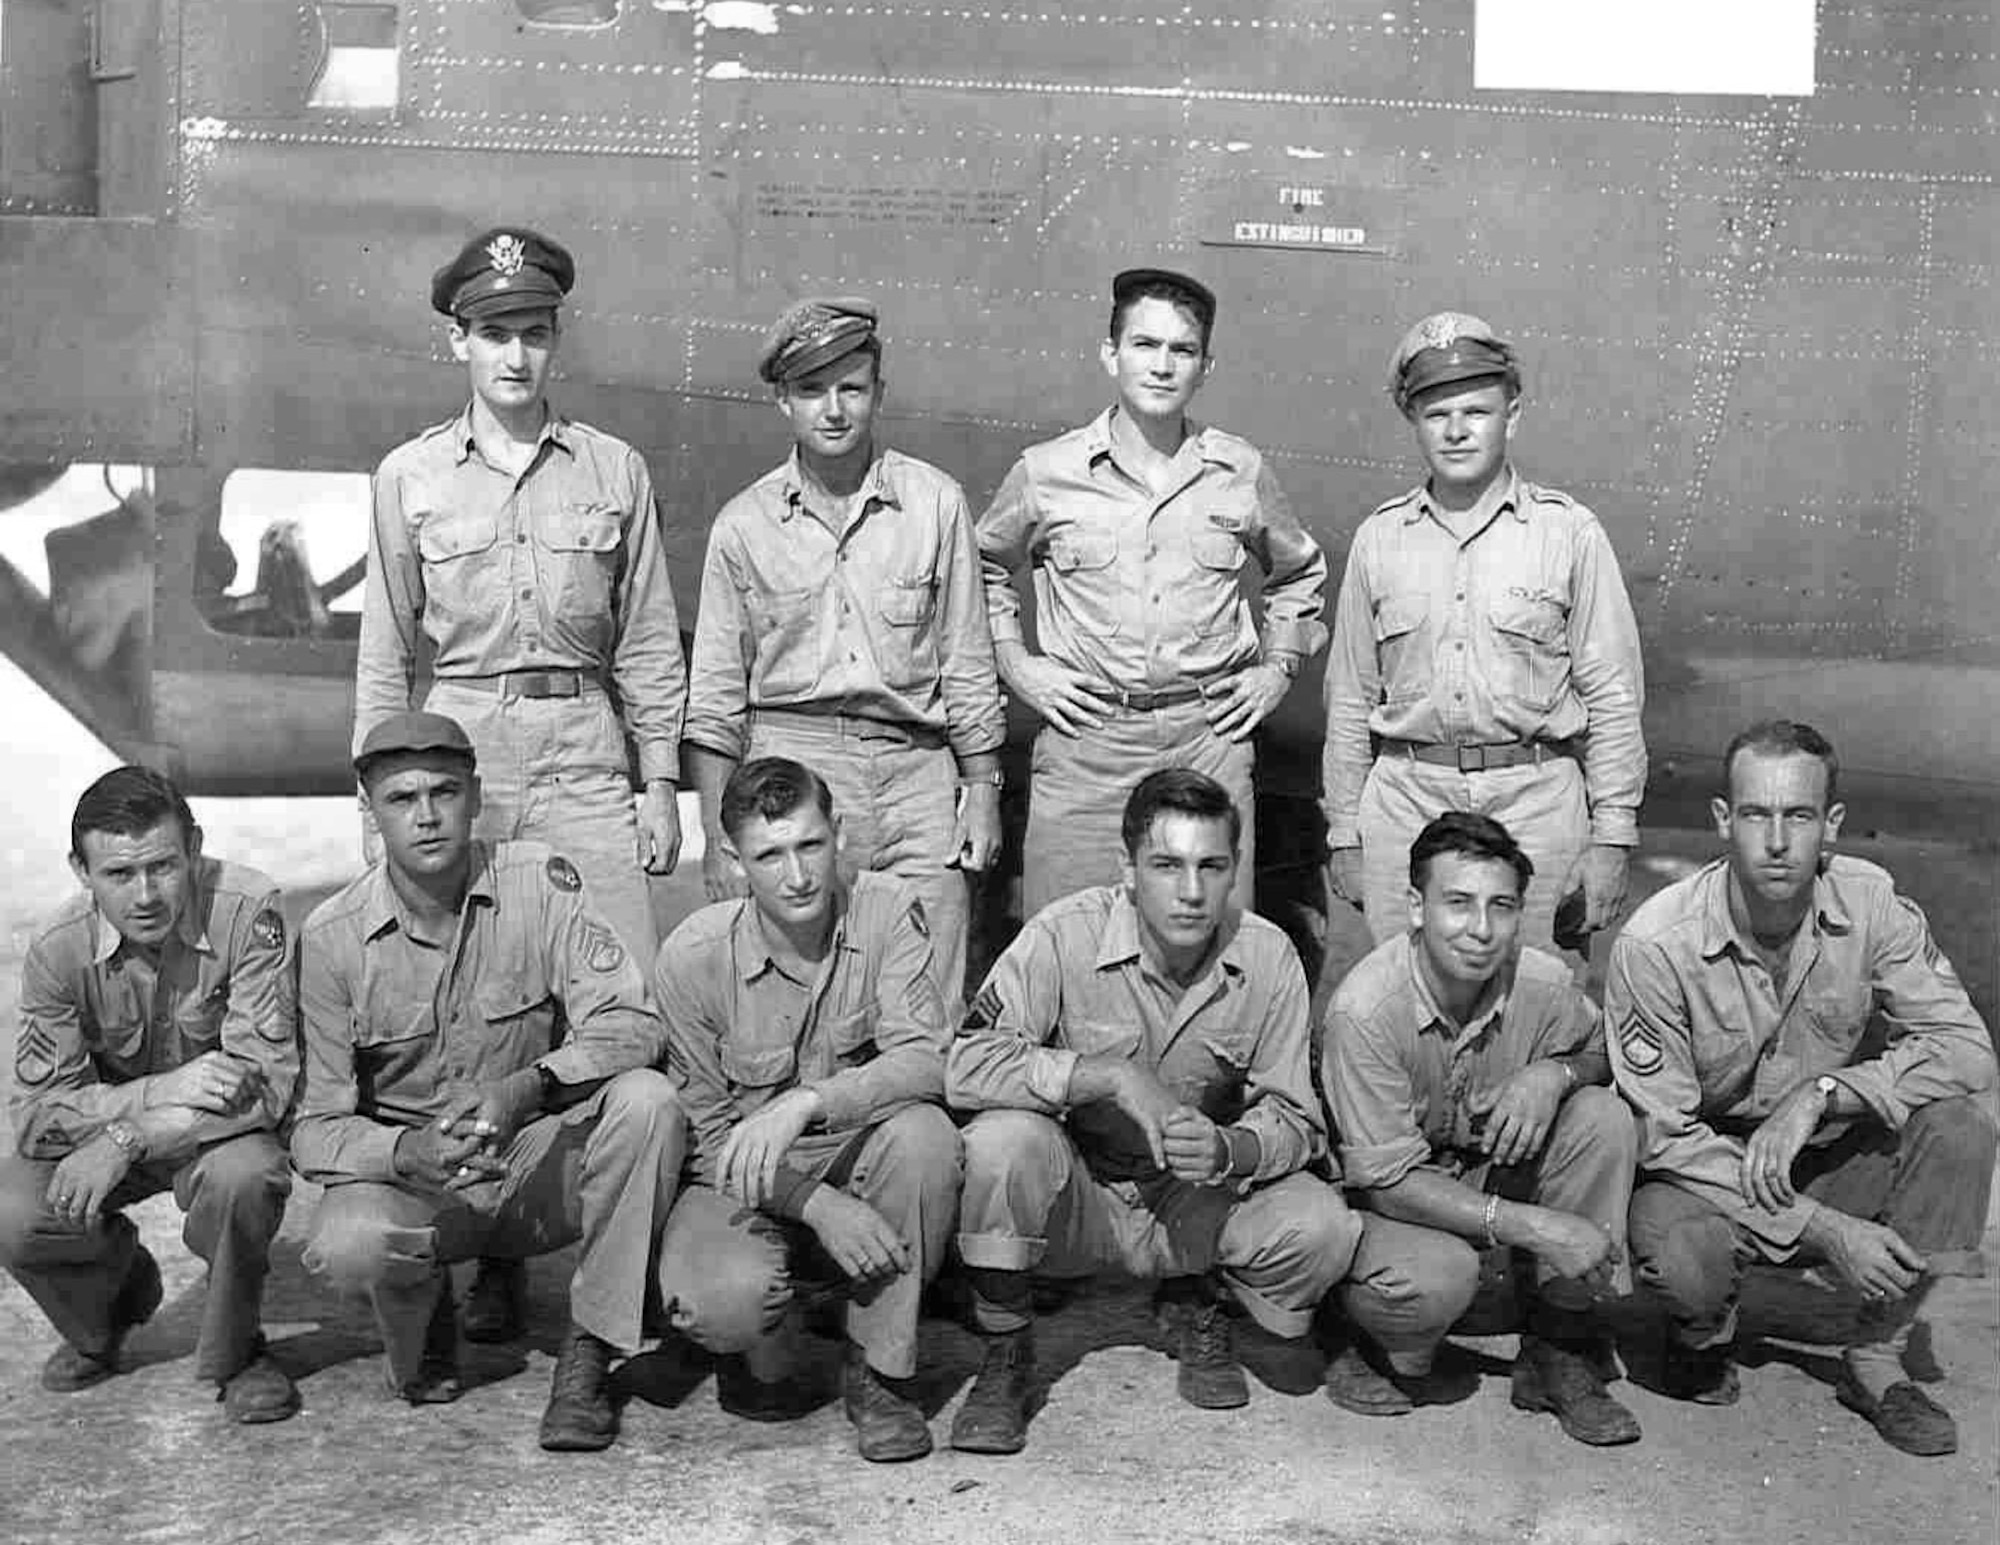 Staff Sgt Roy E. Talbott is shown third from left in the bottom row with fellow crewmembers during World War II. Mr. Talbott received a Purple Heart Aug. 21 at Randolph Air Force Base, Texas. He served as a B-24 gunner with the 72nd Bomb Squadron of the 13th Air Force's 5th Bomb Group, and received the Purple Heart for injuries he received in an attack by Japanese fighter planes in the Pacific Theater during World War II. (Courtesy photo)